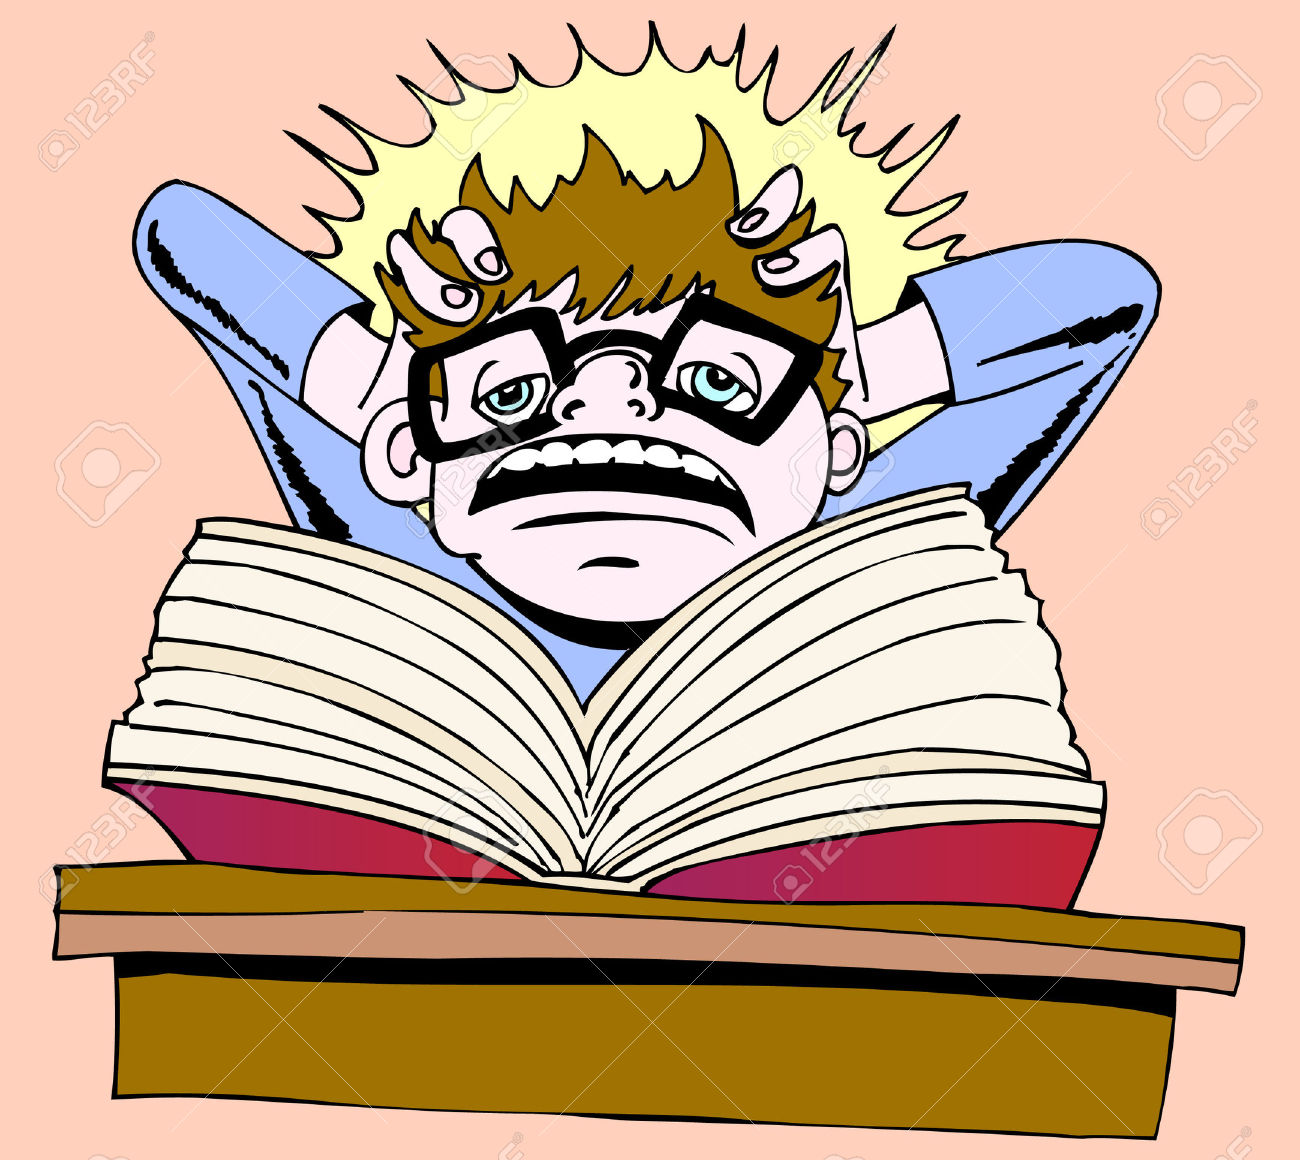 frustrated student clip art - Clip Art Library